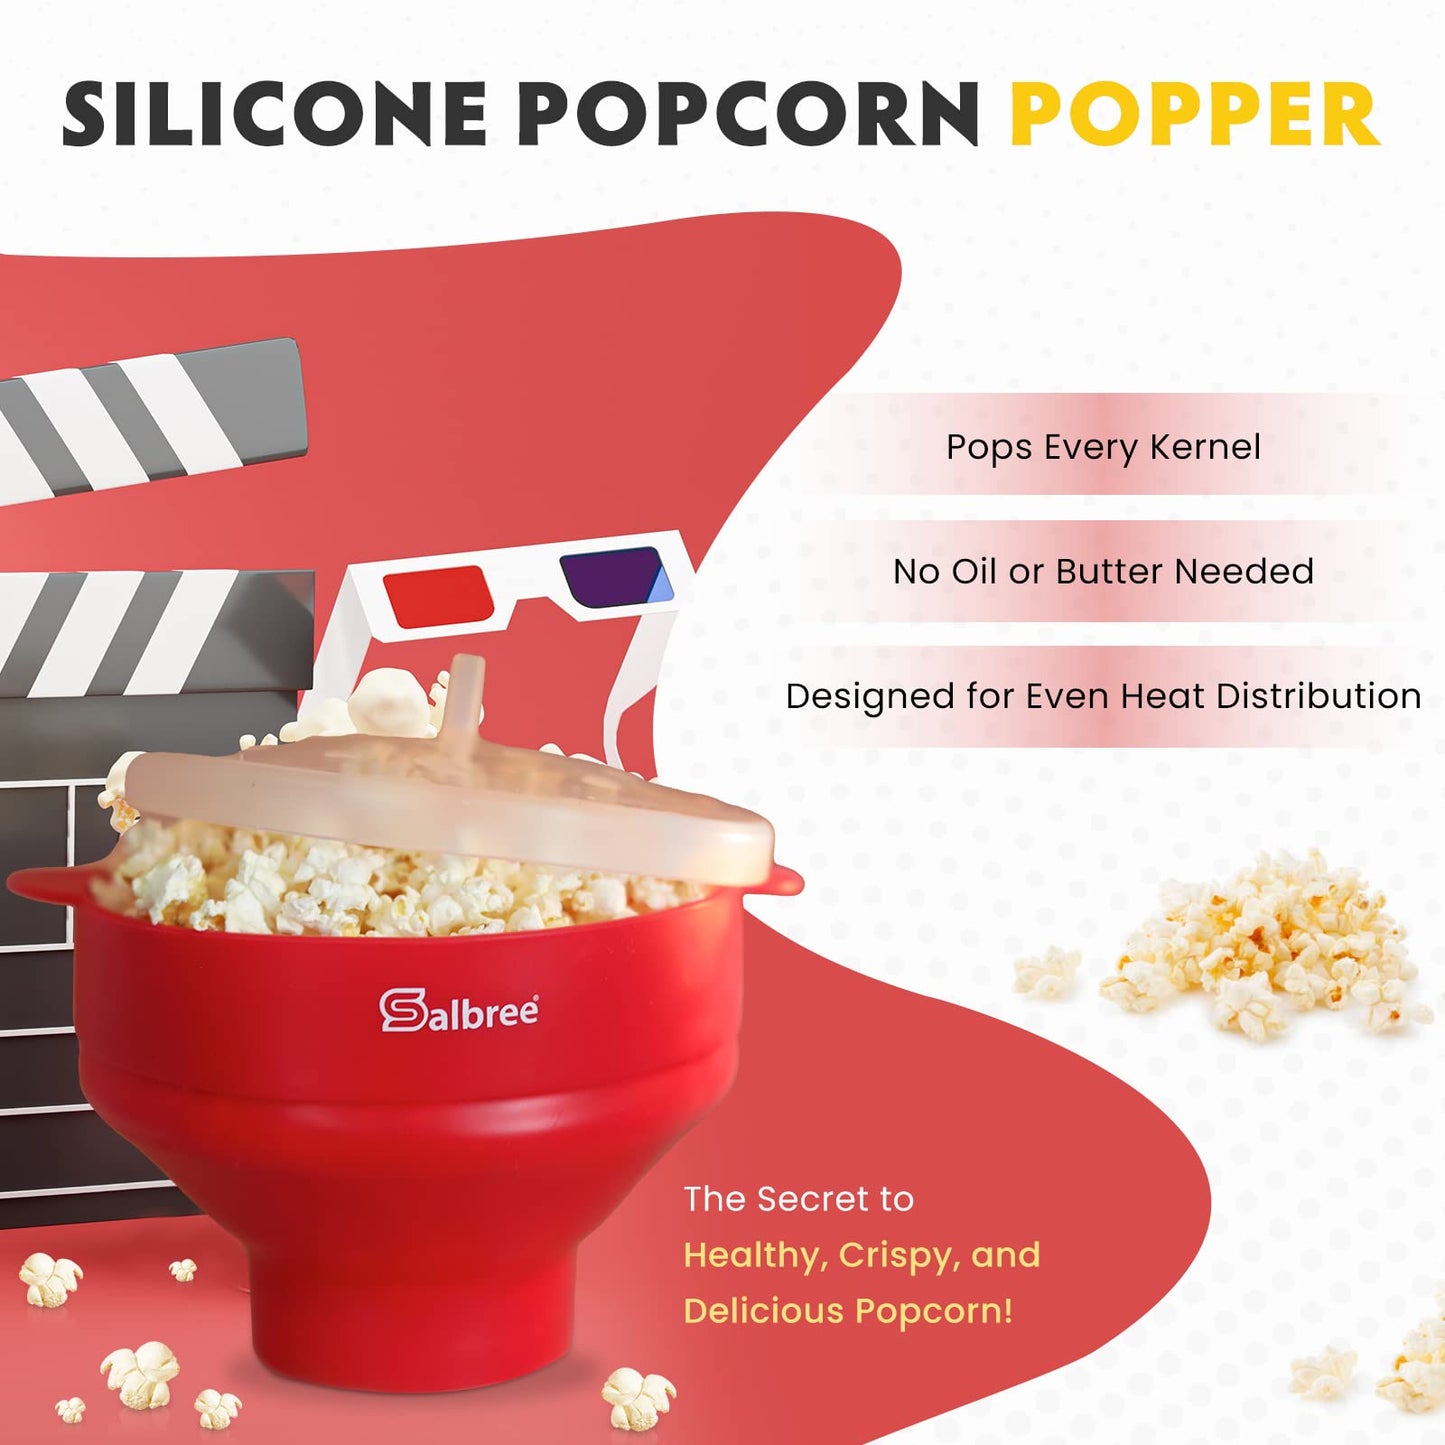 The Original Salbree Microwave Popcorn Popper, Silicone Popcorn Maker, Collapsible Microwavable Bowl - Hot Air Popper - No Oil Required - The Most Colors Available (Aqua)